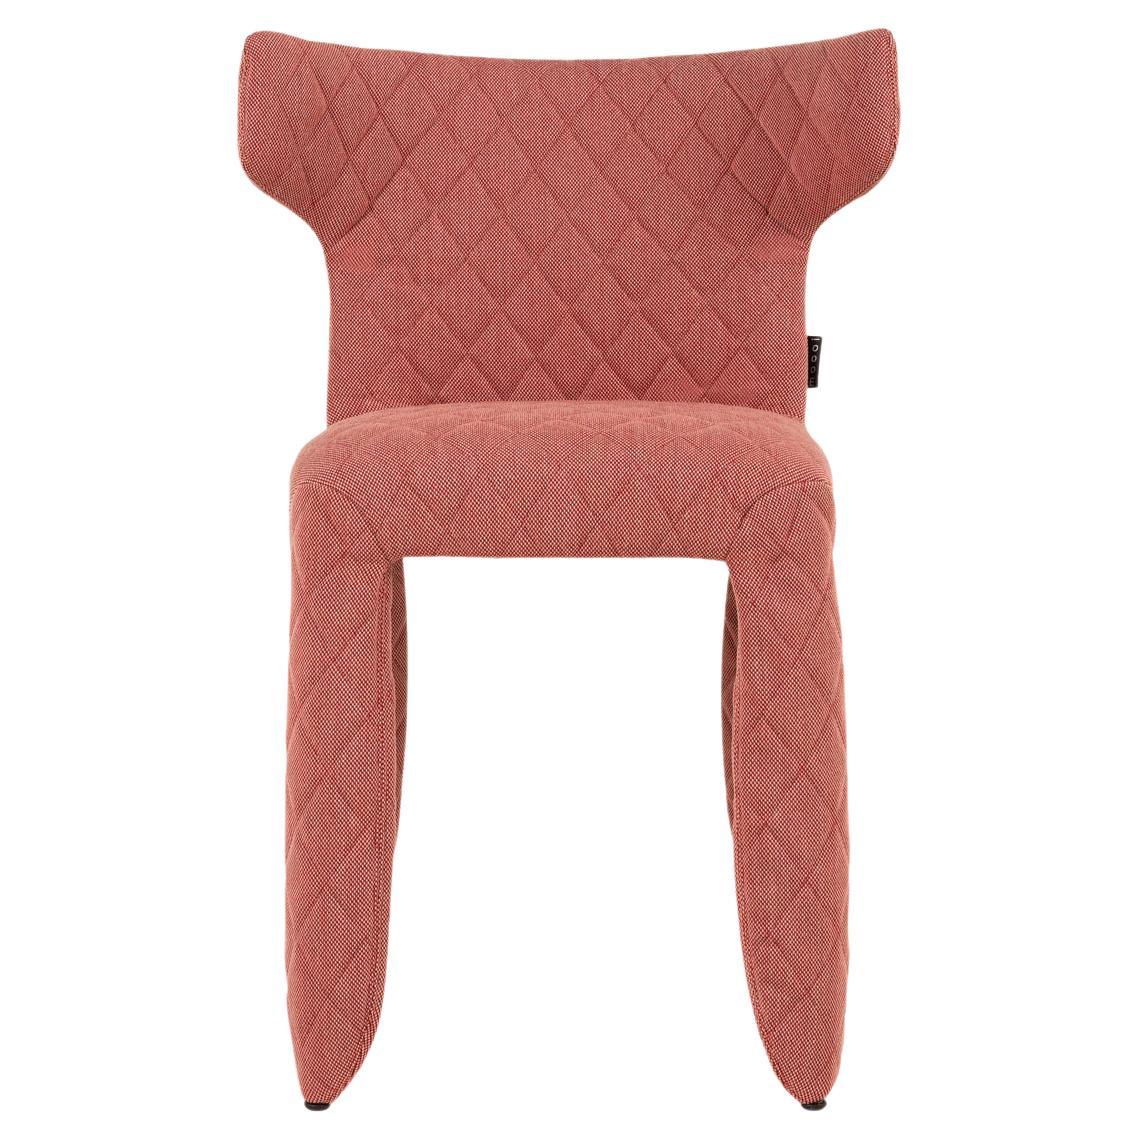 Moooi Monster Diamond Chair with Arms in Steelcut Trio 3, 526 Pink Upholstery